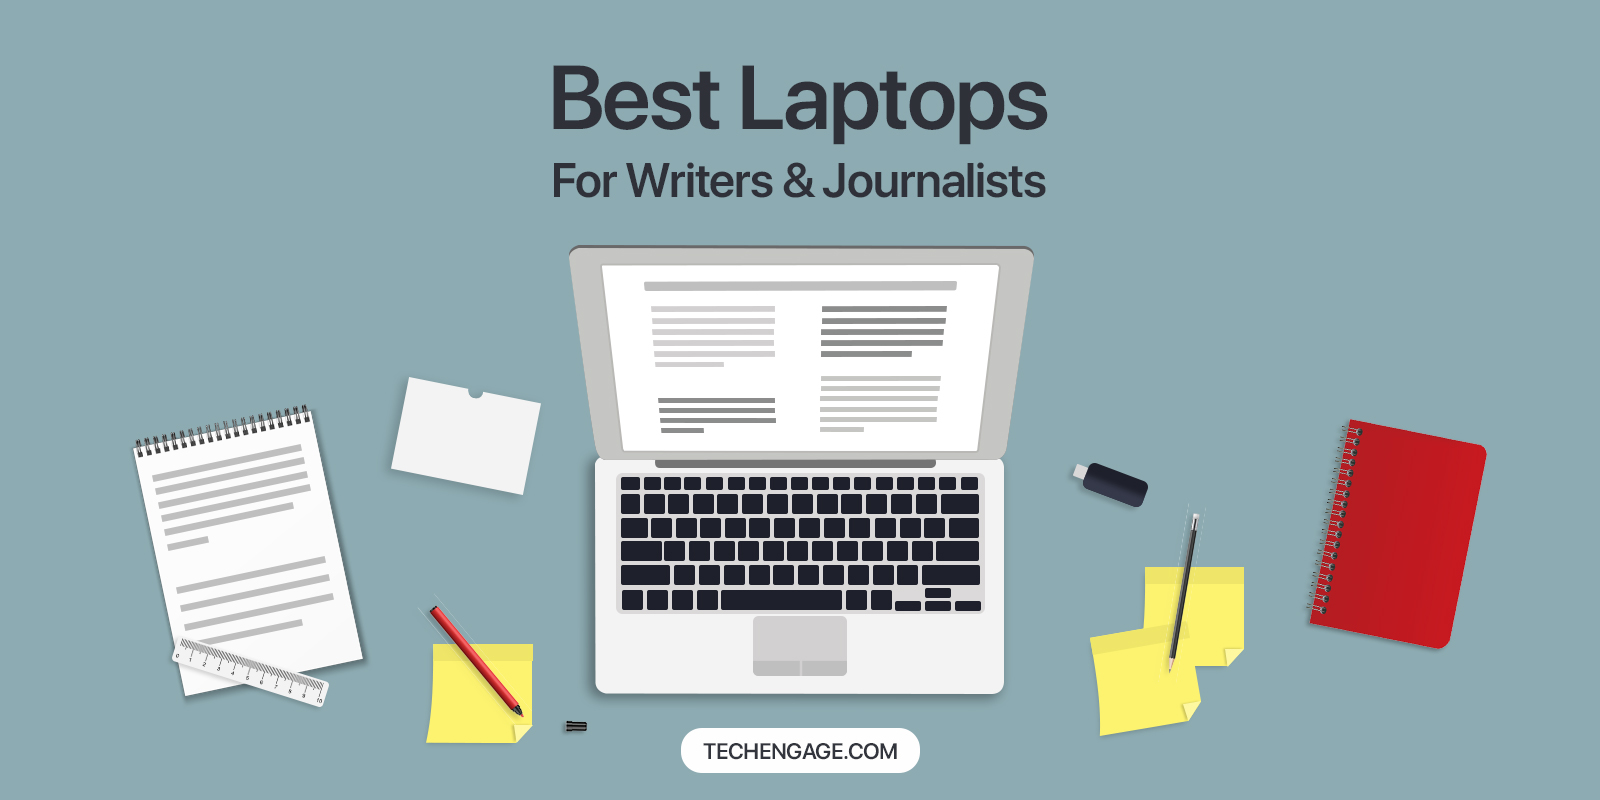 An illustration of the best laptops for writers and journalists